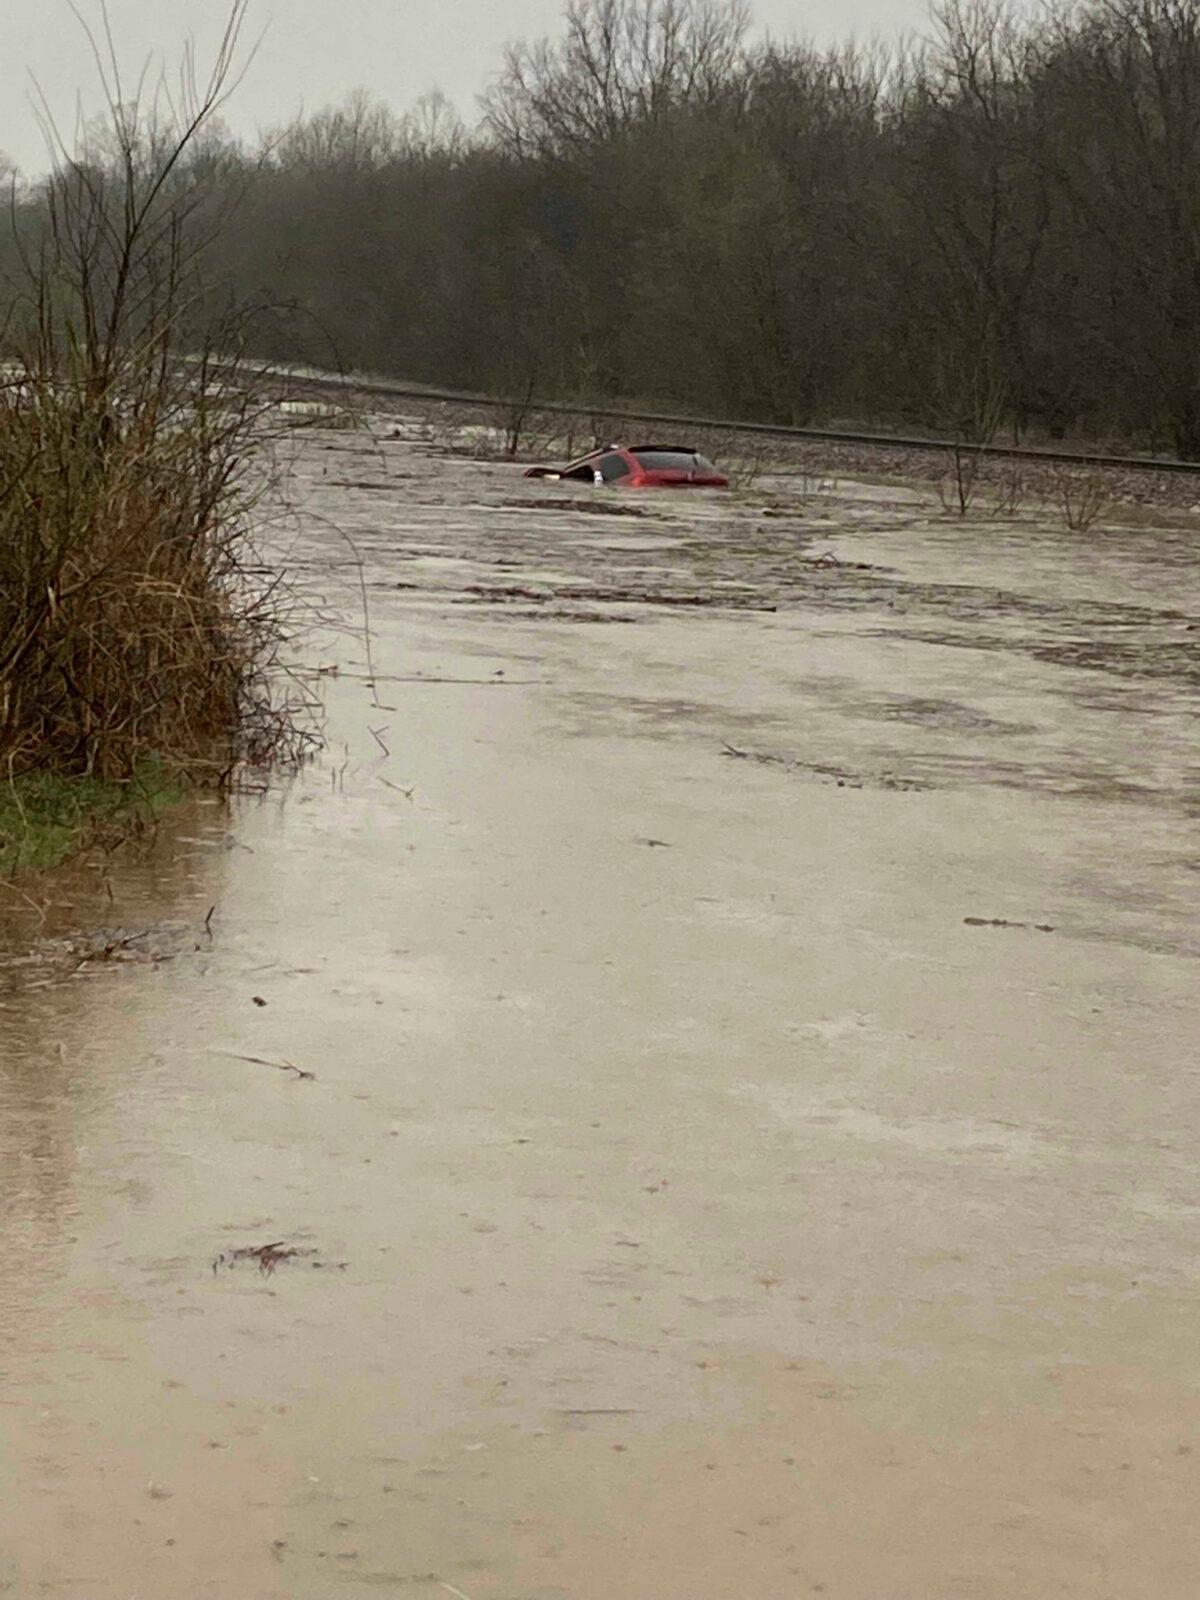 A red SUV is submerged in floodwater on Old Ritchey Road in Granby, Mo., early on March 24, 2023. Hoyer rescued an elderly woman from the car. (Layton Hoyer via AP)